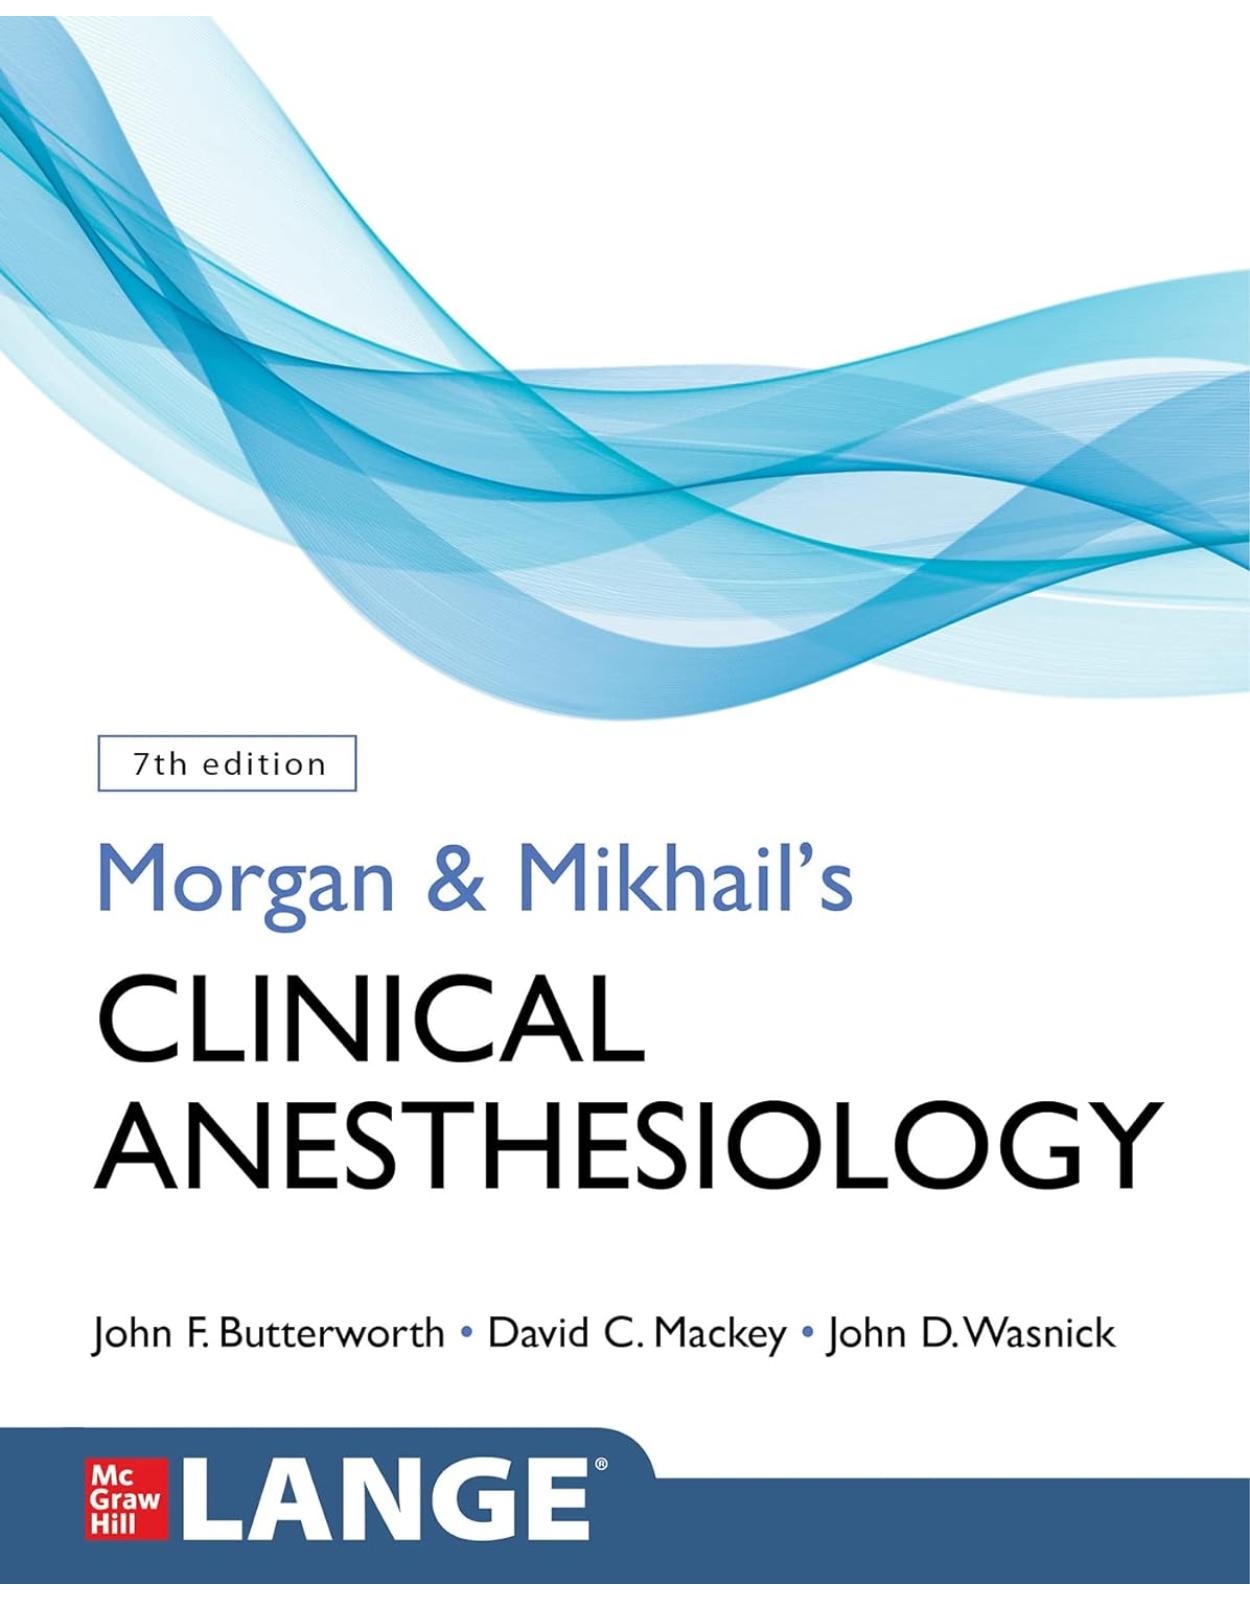 Morgan and Mikhail’s Clinical Anesthesiology, 7th Edition